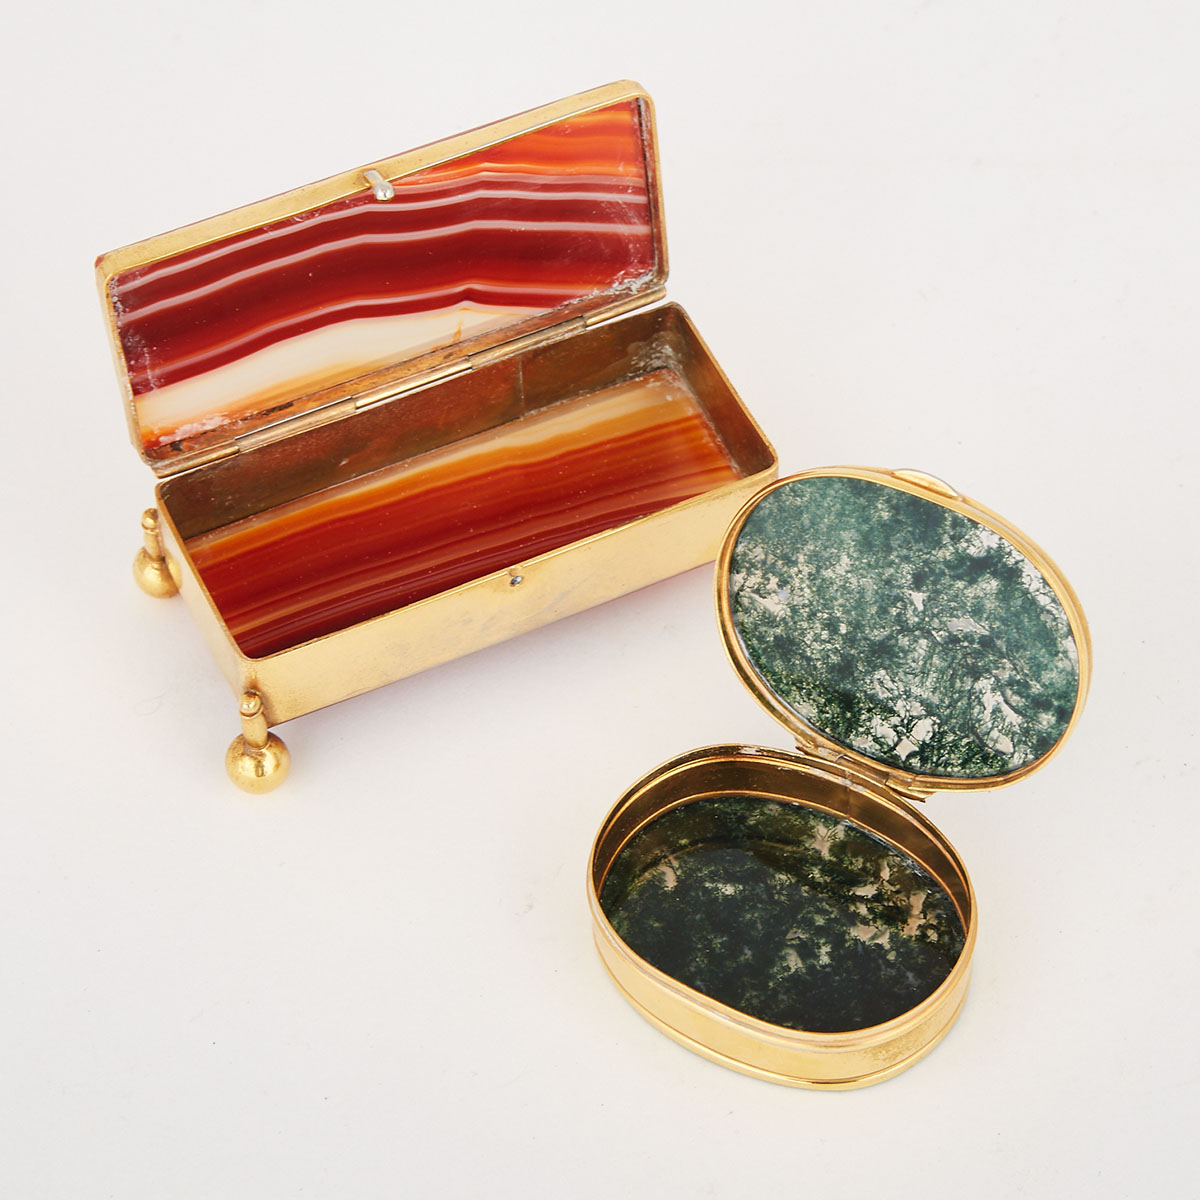 Two Small Italian Agate Mounted Gilt Metal Boxes, early 20th century